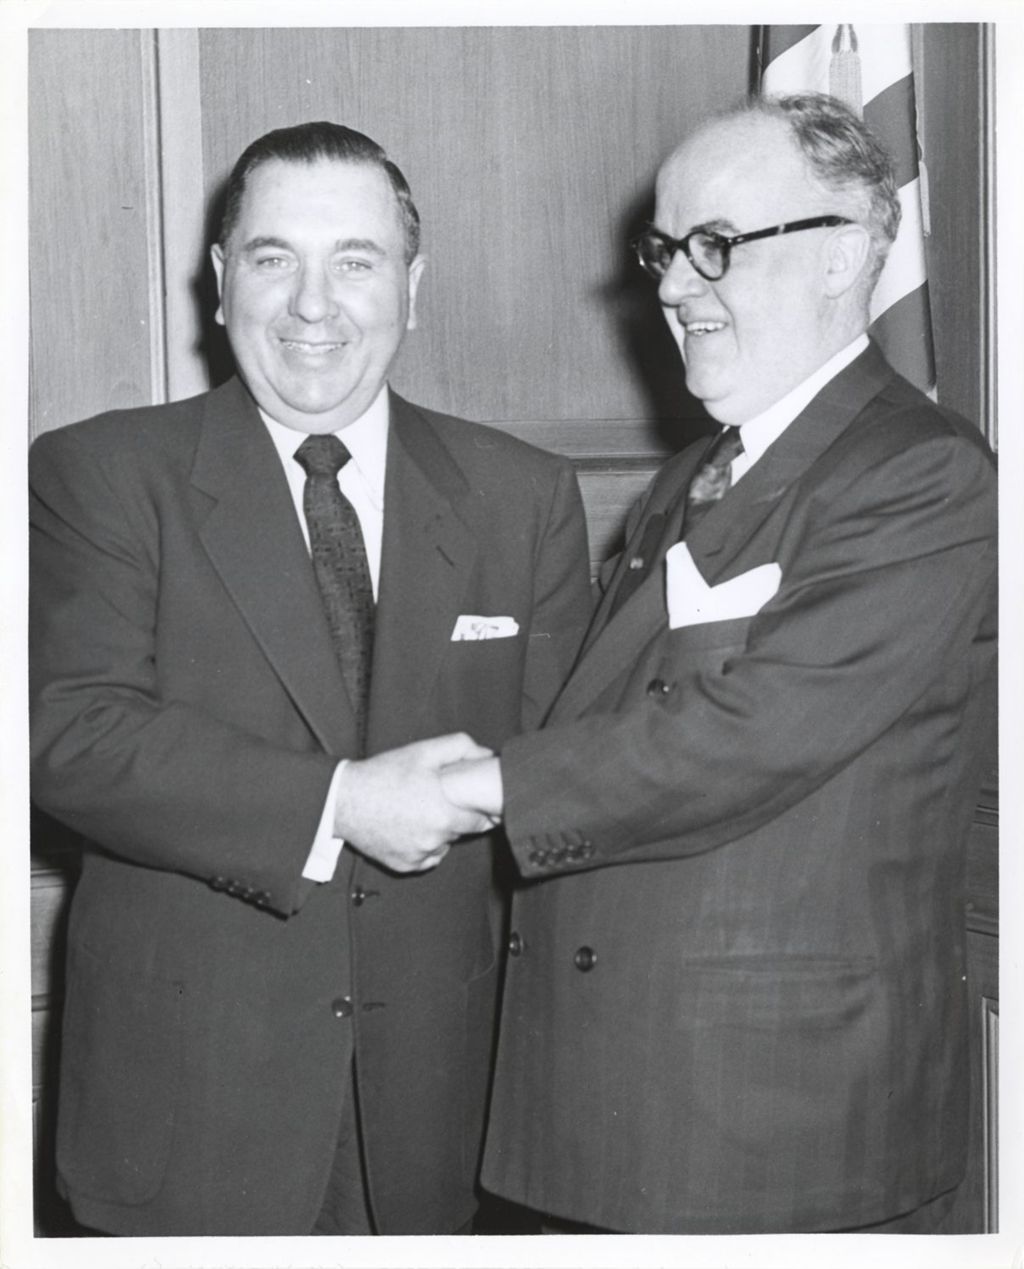 Miniature of Richard J. Daley, 1959 mayoral campaign